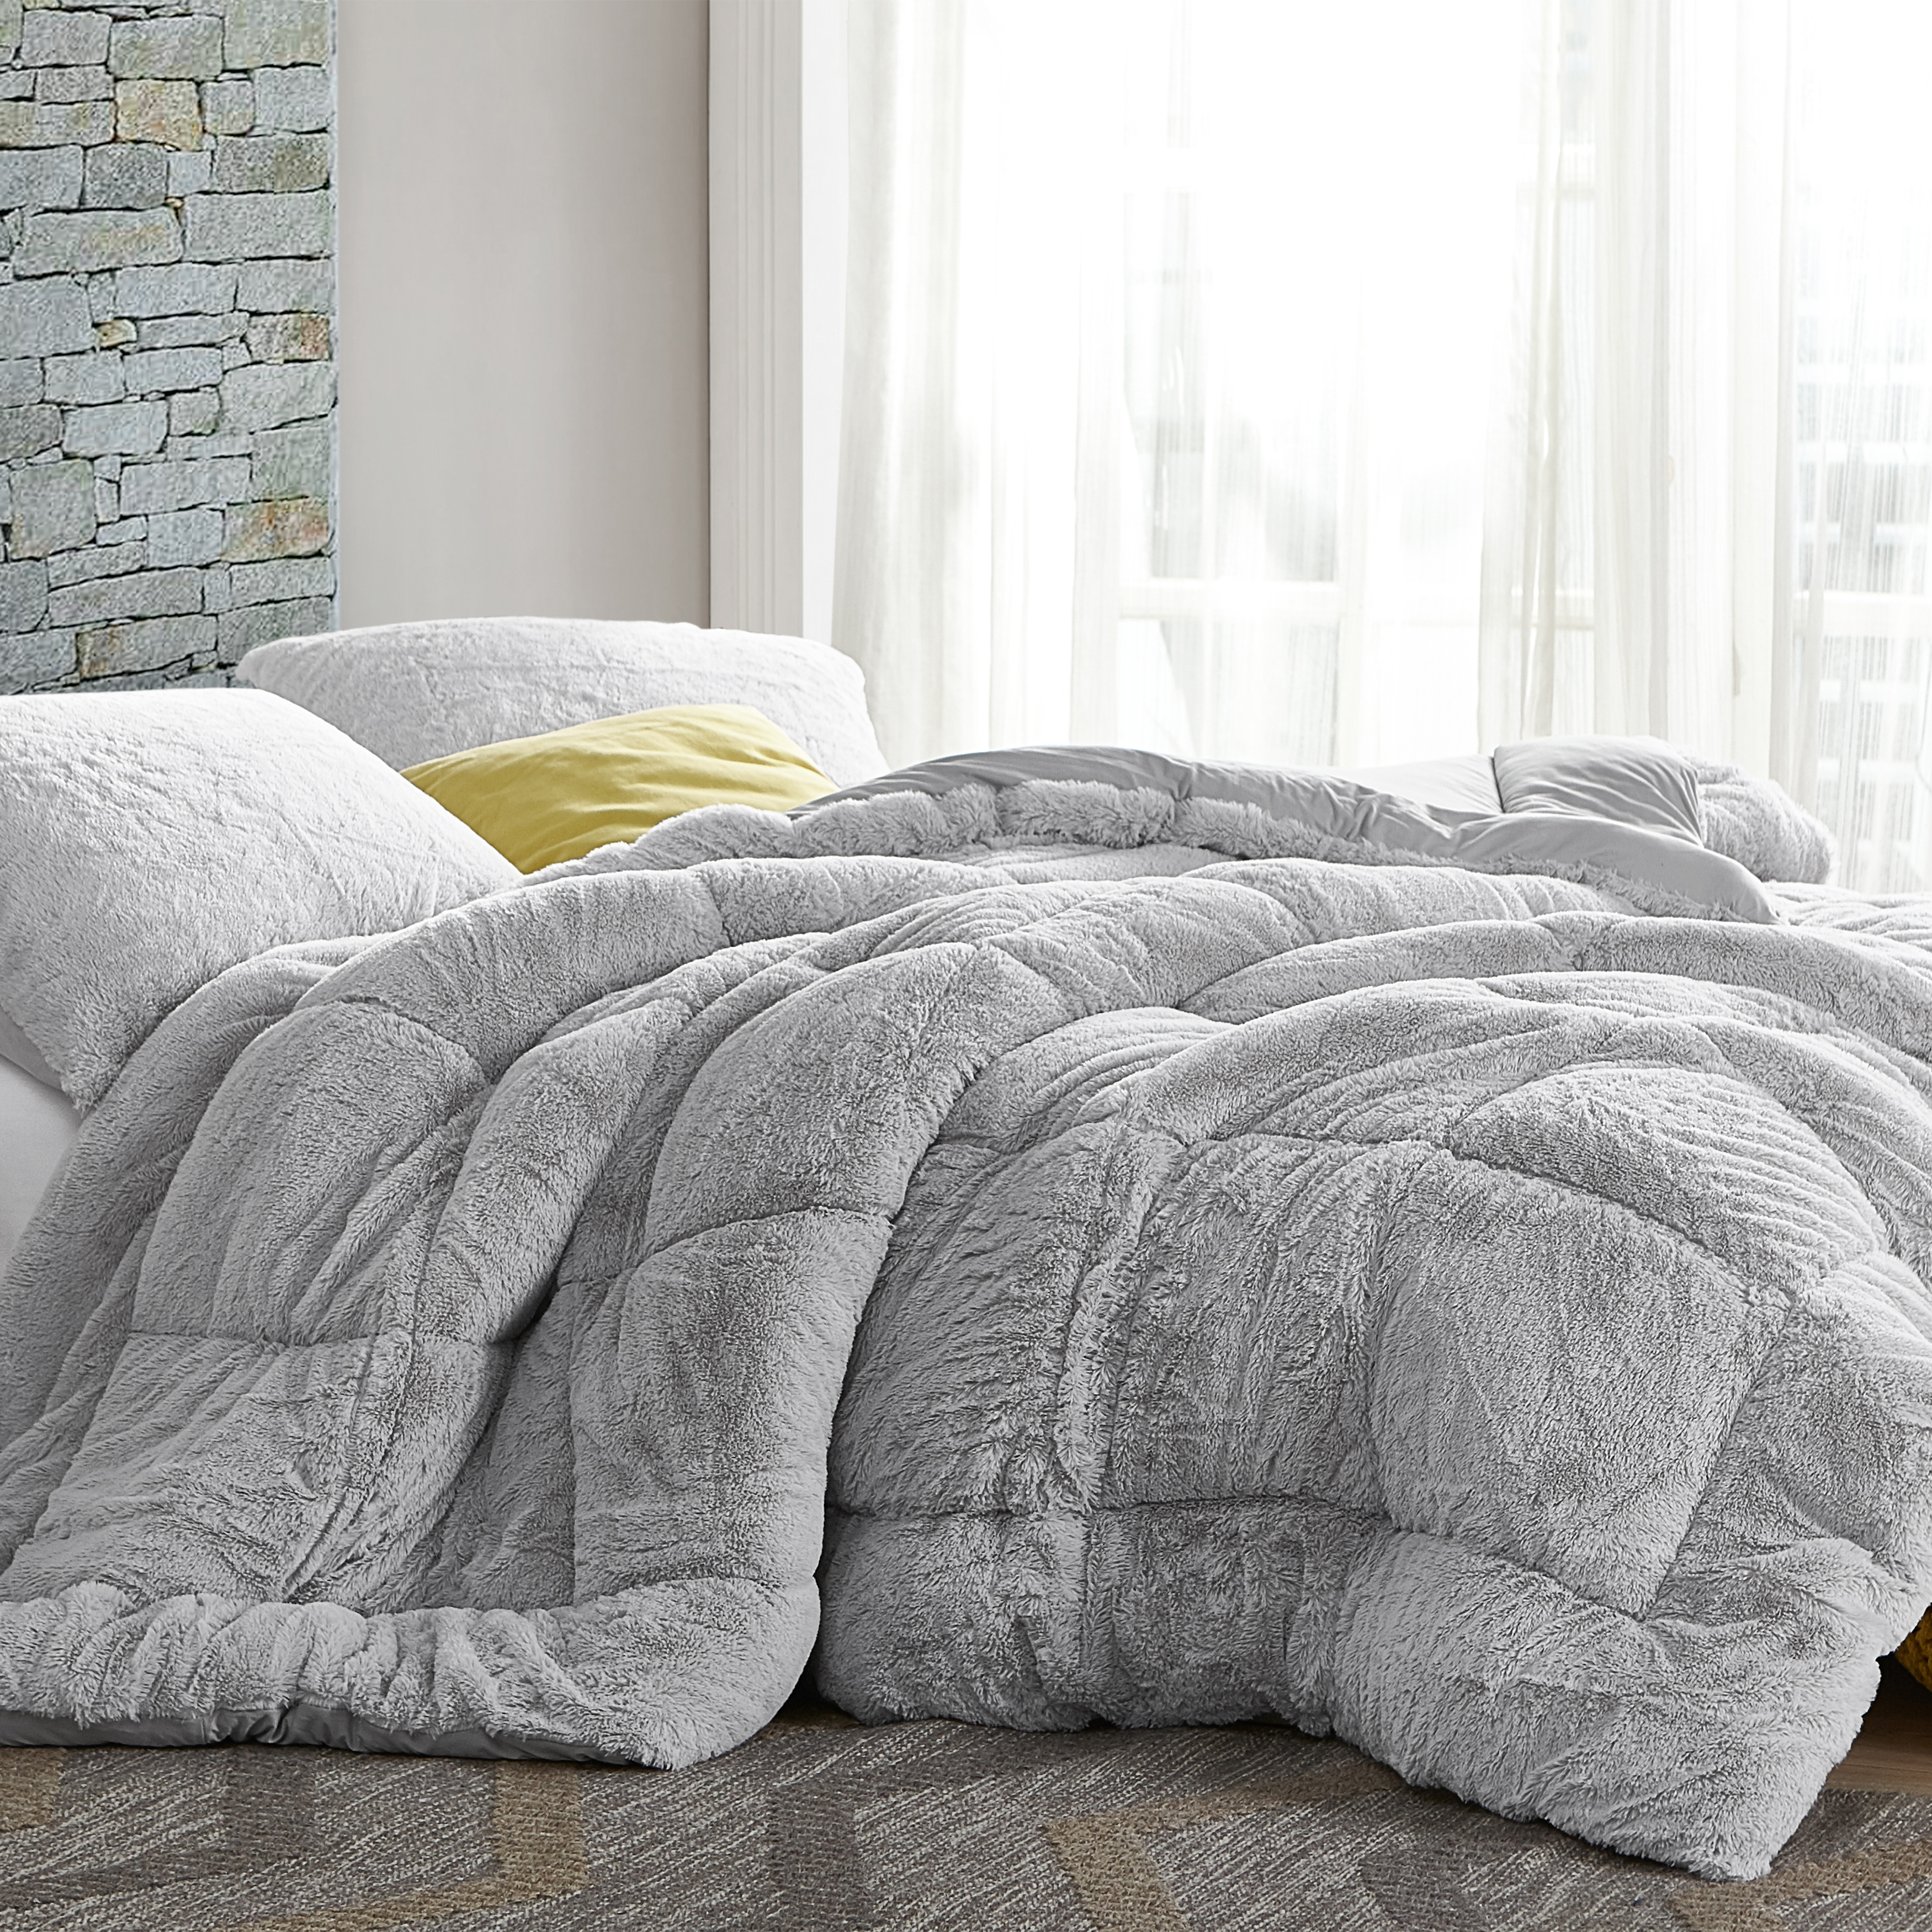 Are You Kidding Bare - Coma Inducer Oversized Comforter - Antarctica Gray